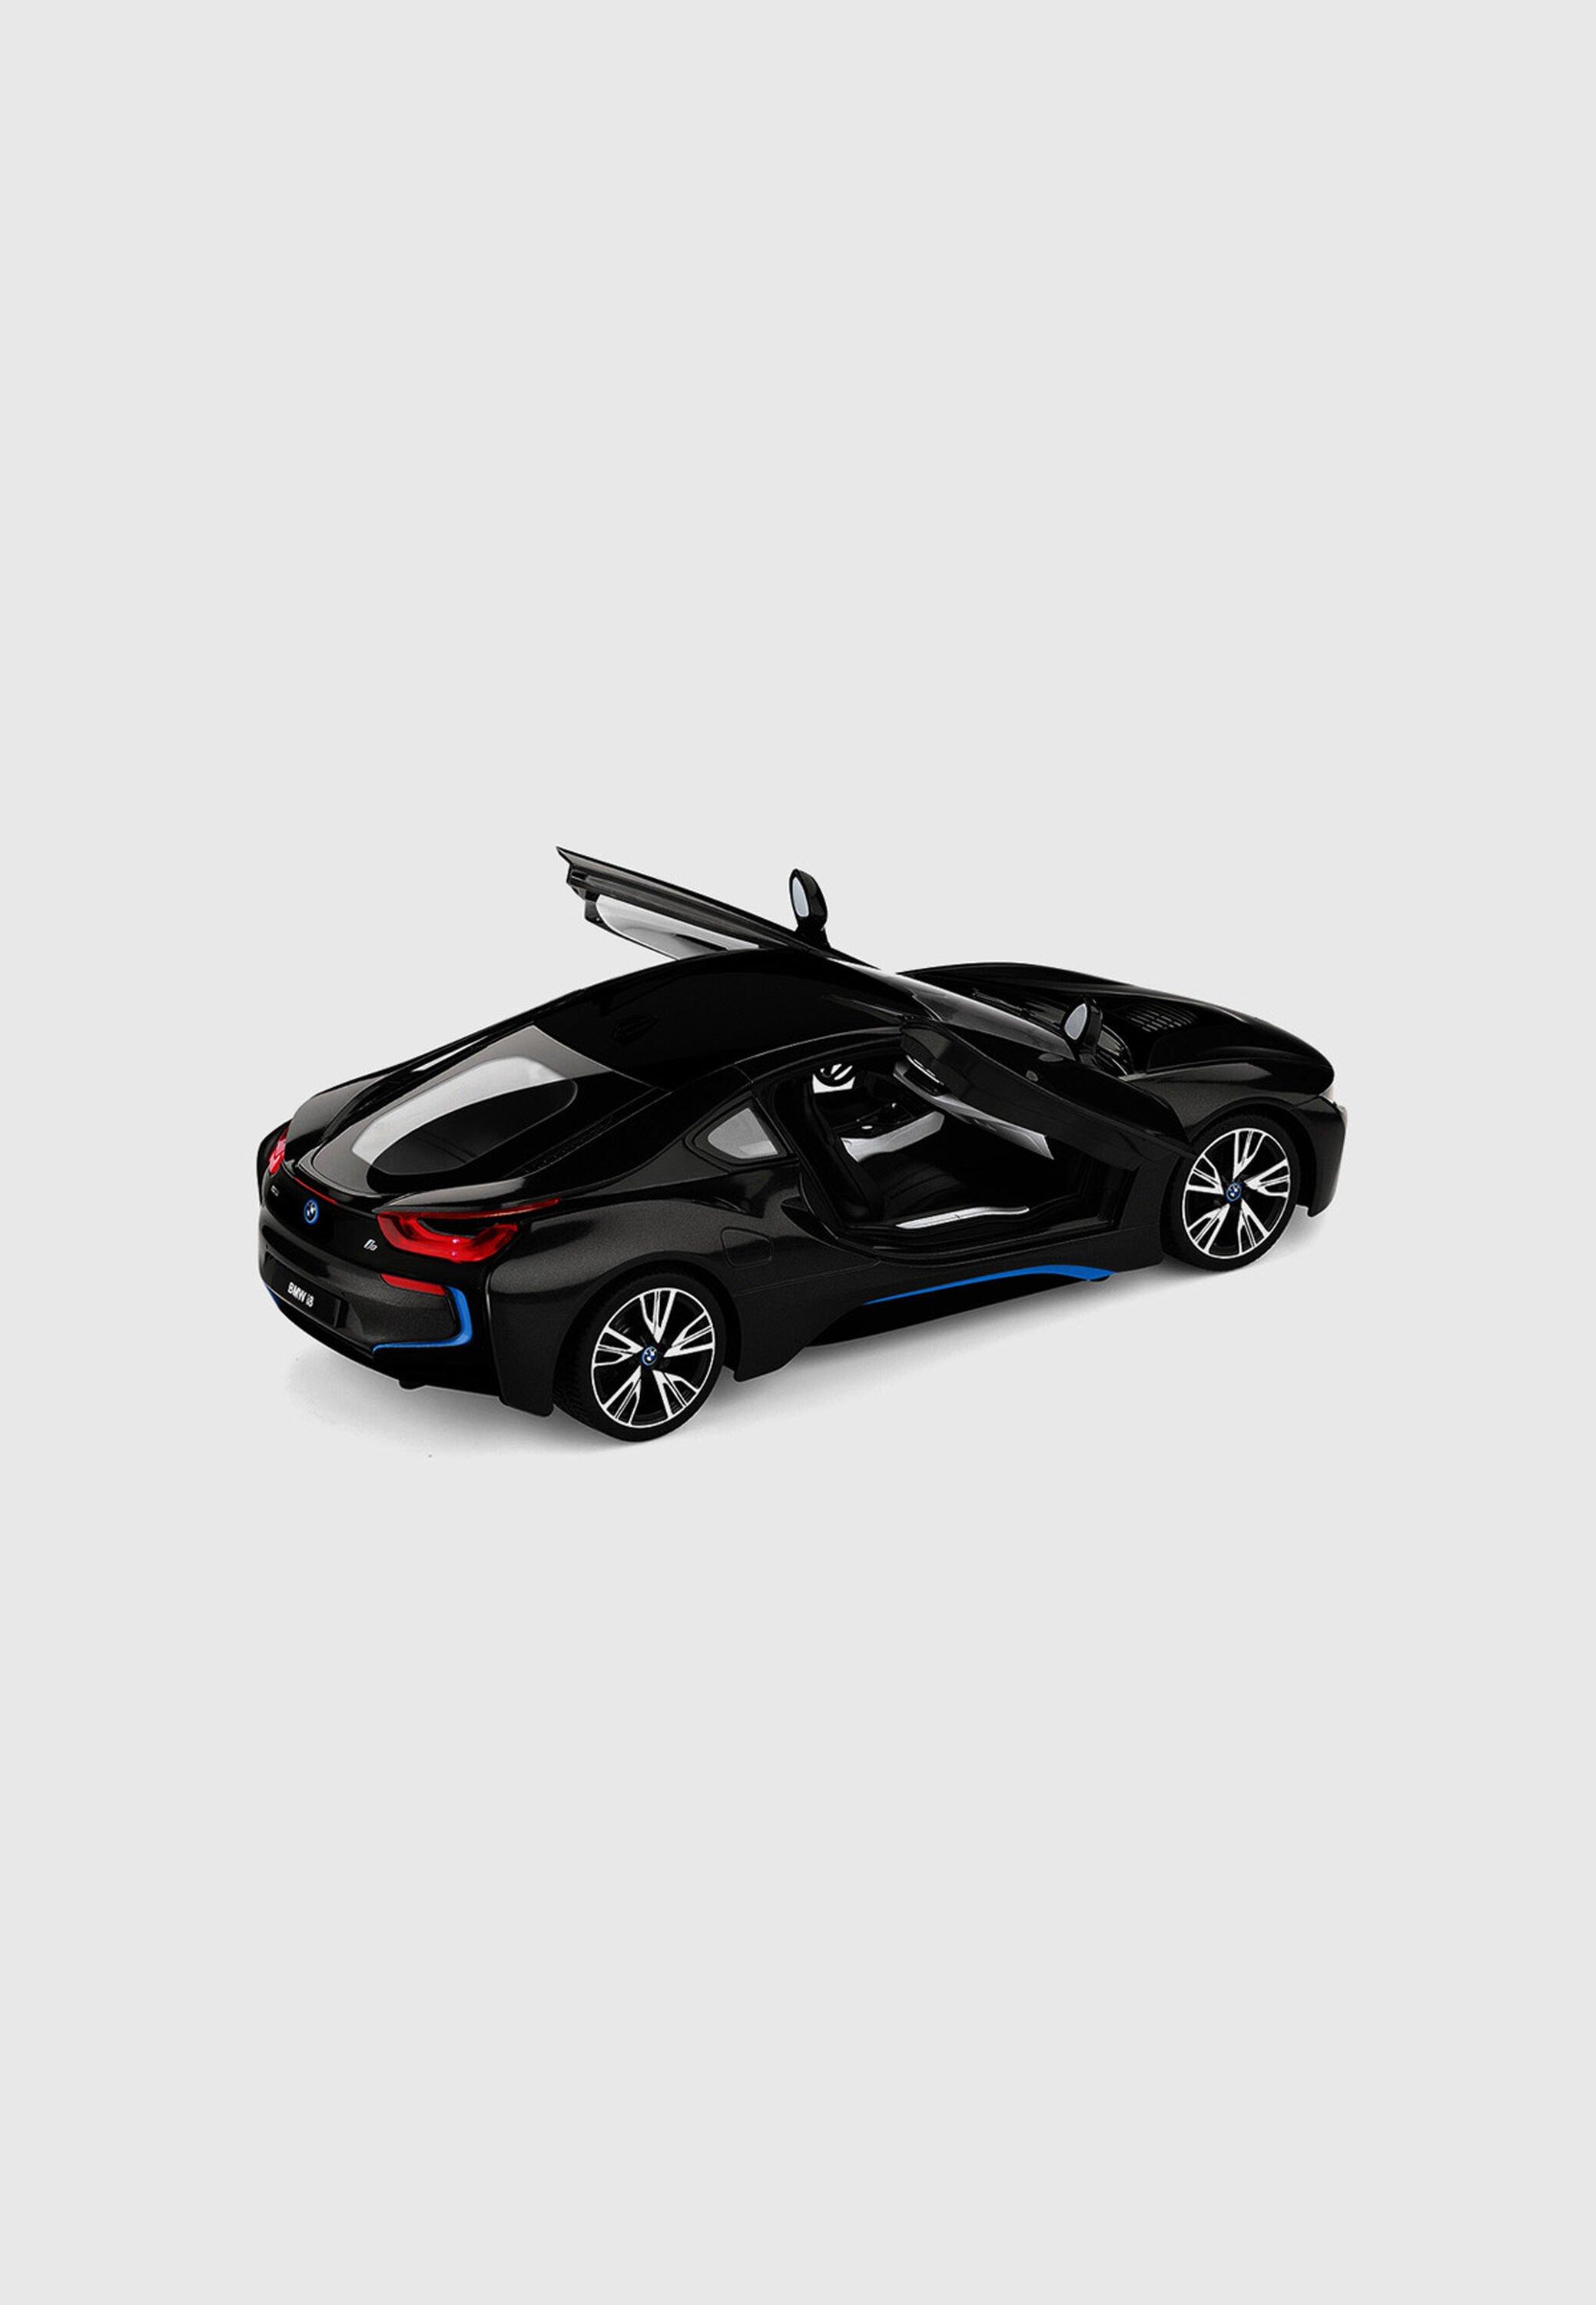 Bmw I8 Rc Car: Prolonging the Life of Your BMW i8 RC Car: Tips and Accessories